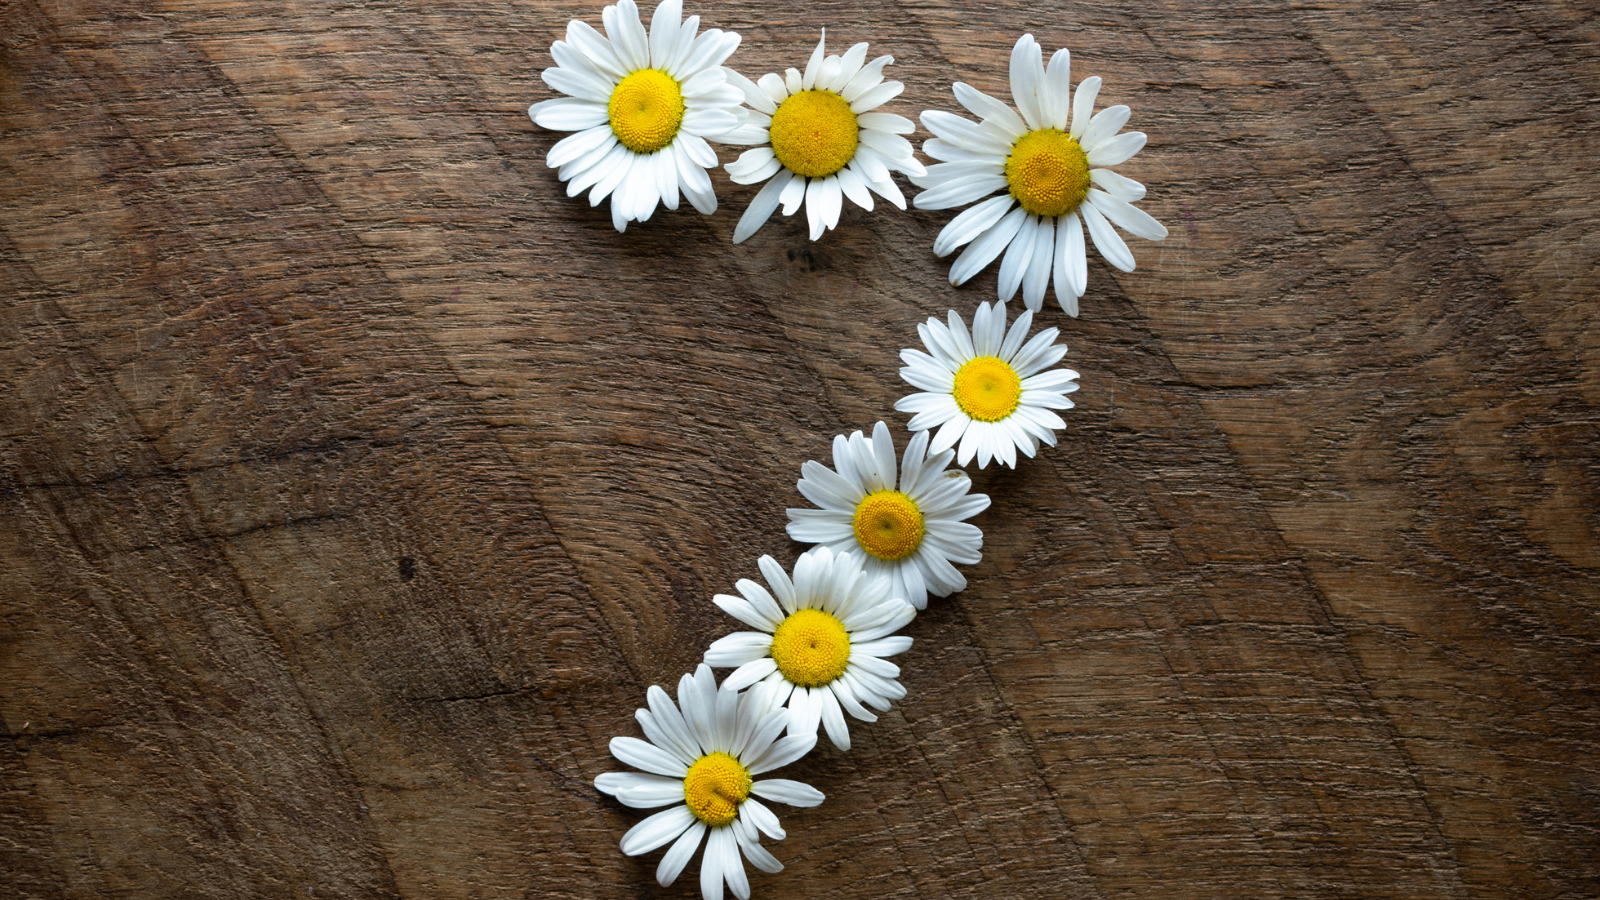 Daisies laid out to make the number 7.